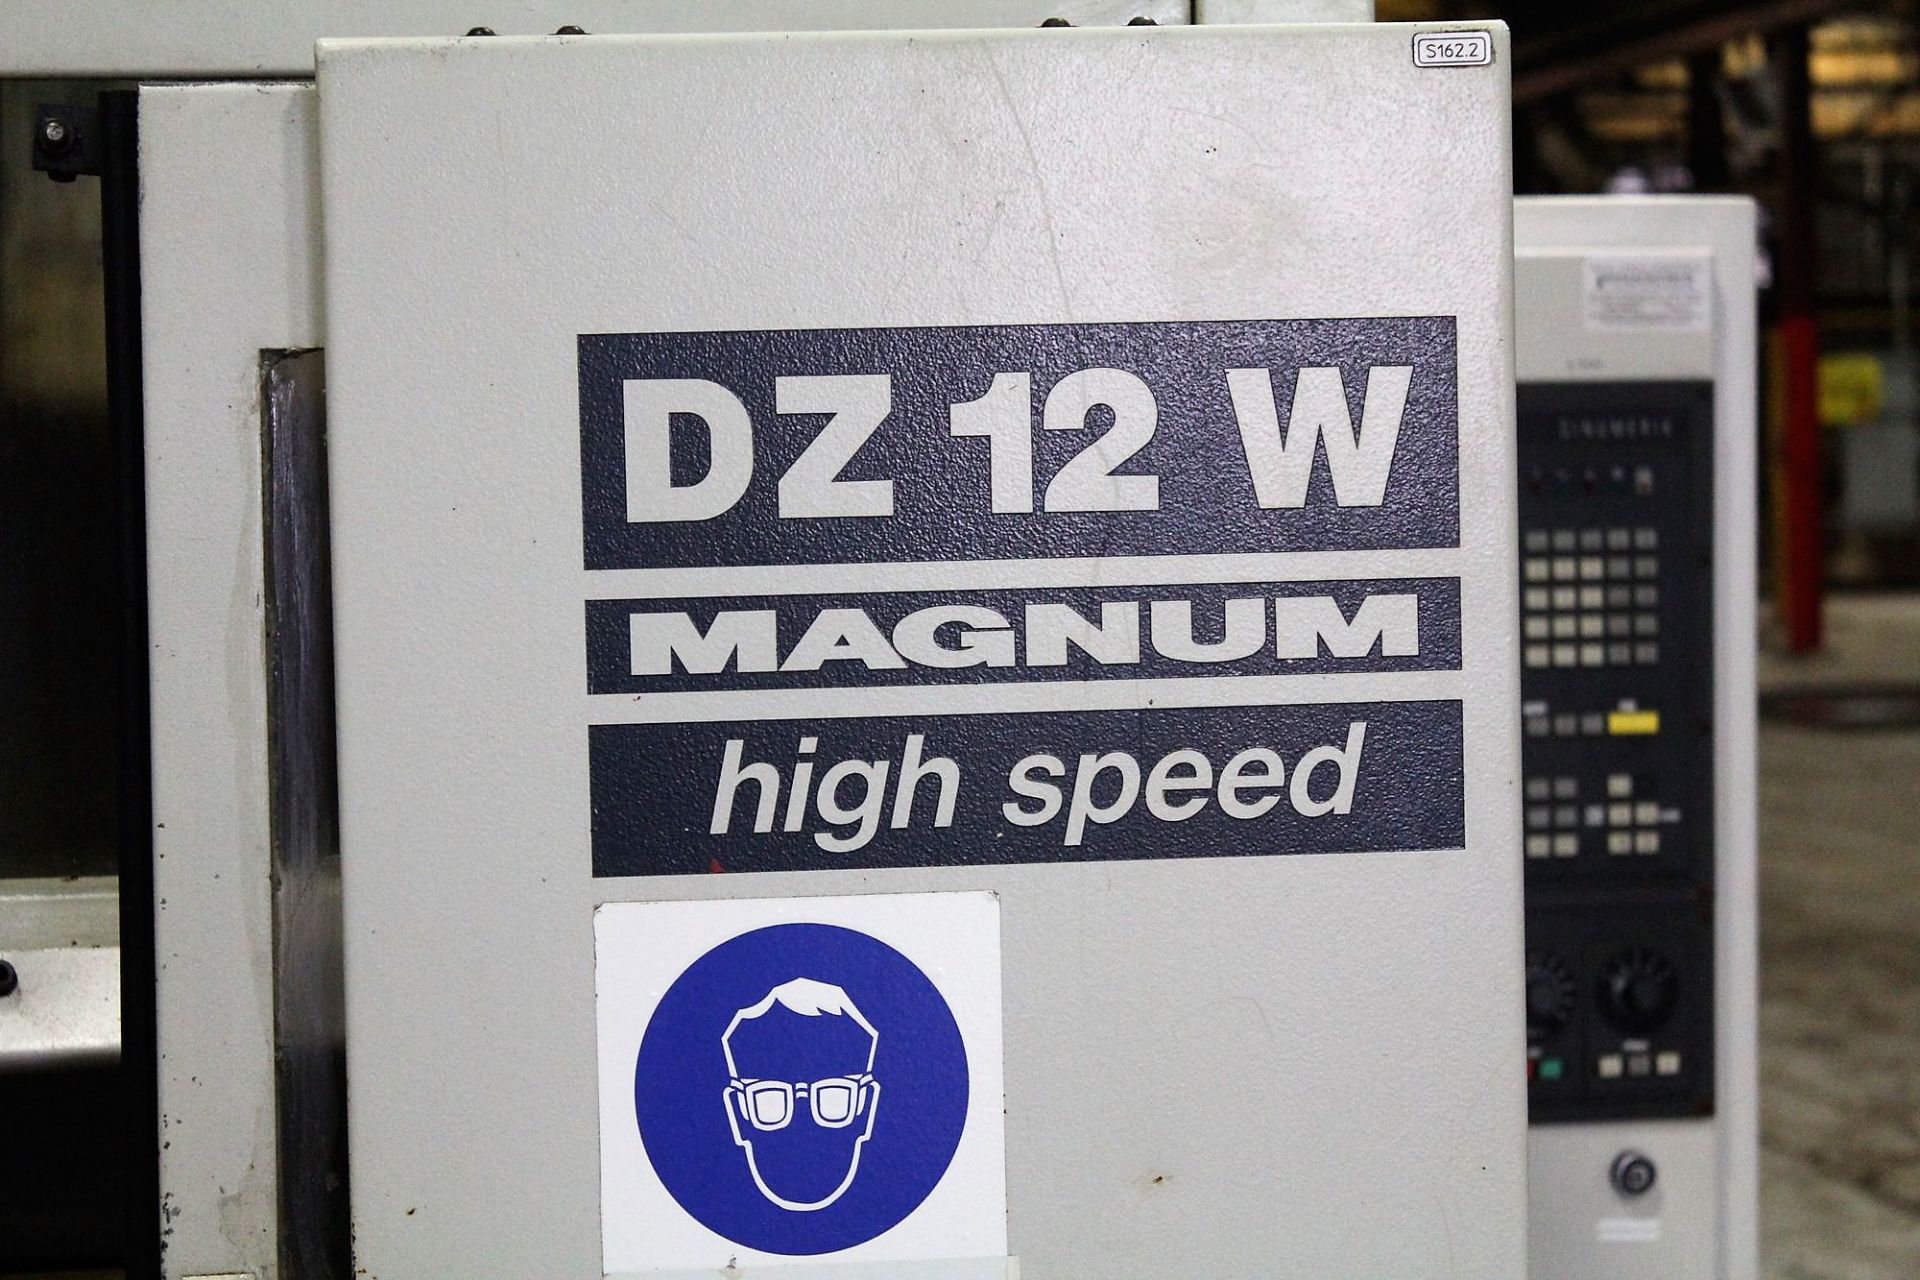 CHIRON DZ-12W MAGNUM HIGH SPEED CNC TWIN SPINDLE VERTICAL MACHING CENTER WITH PALLET CHANGER - Image 15 of 33